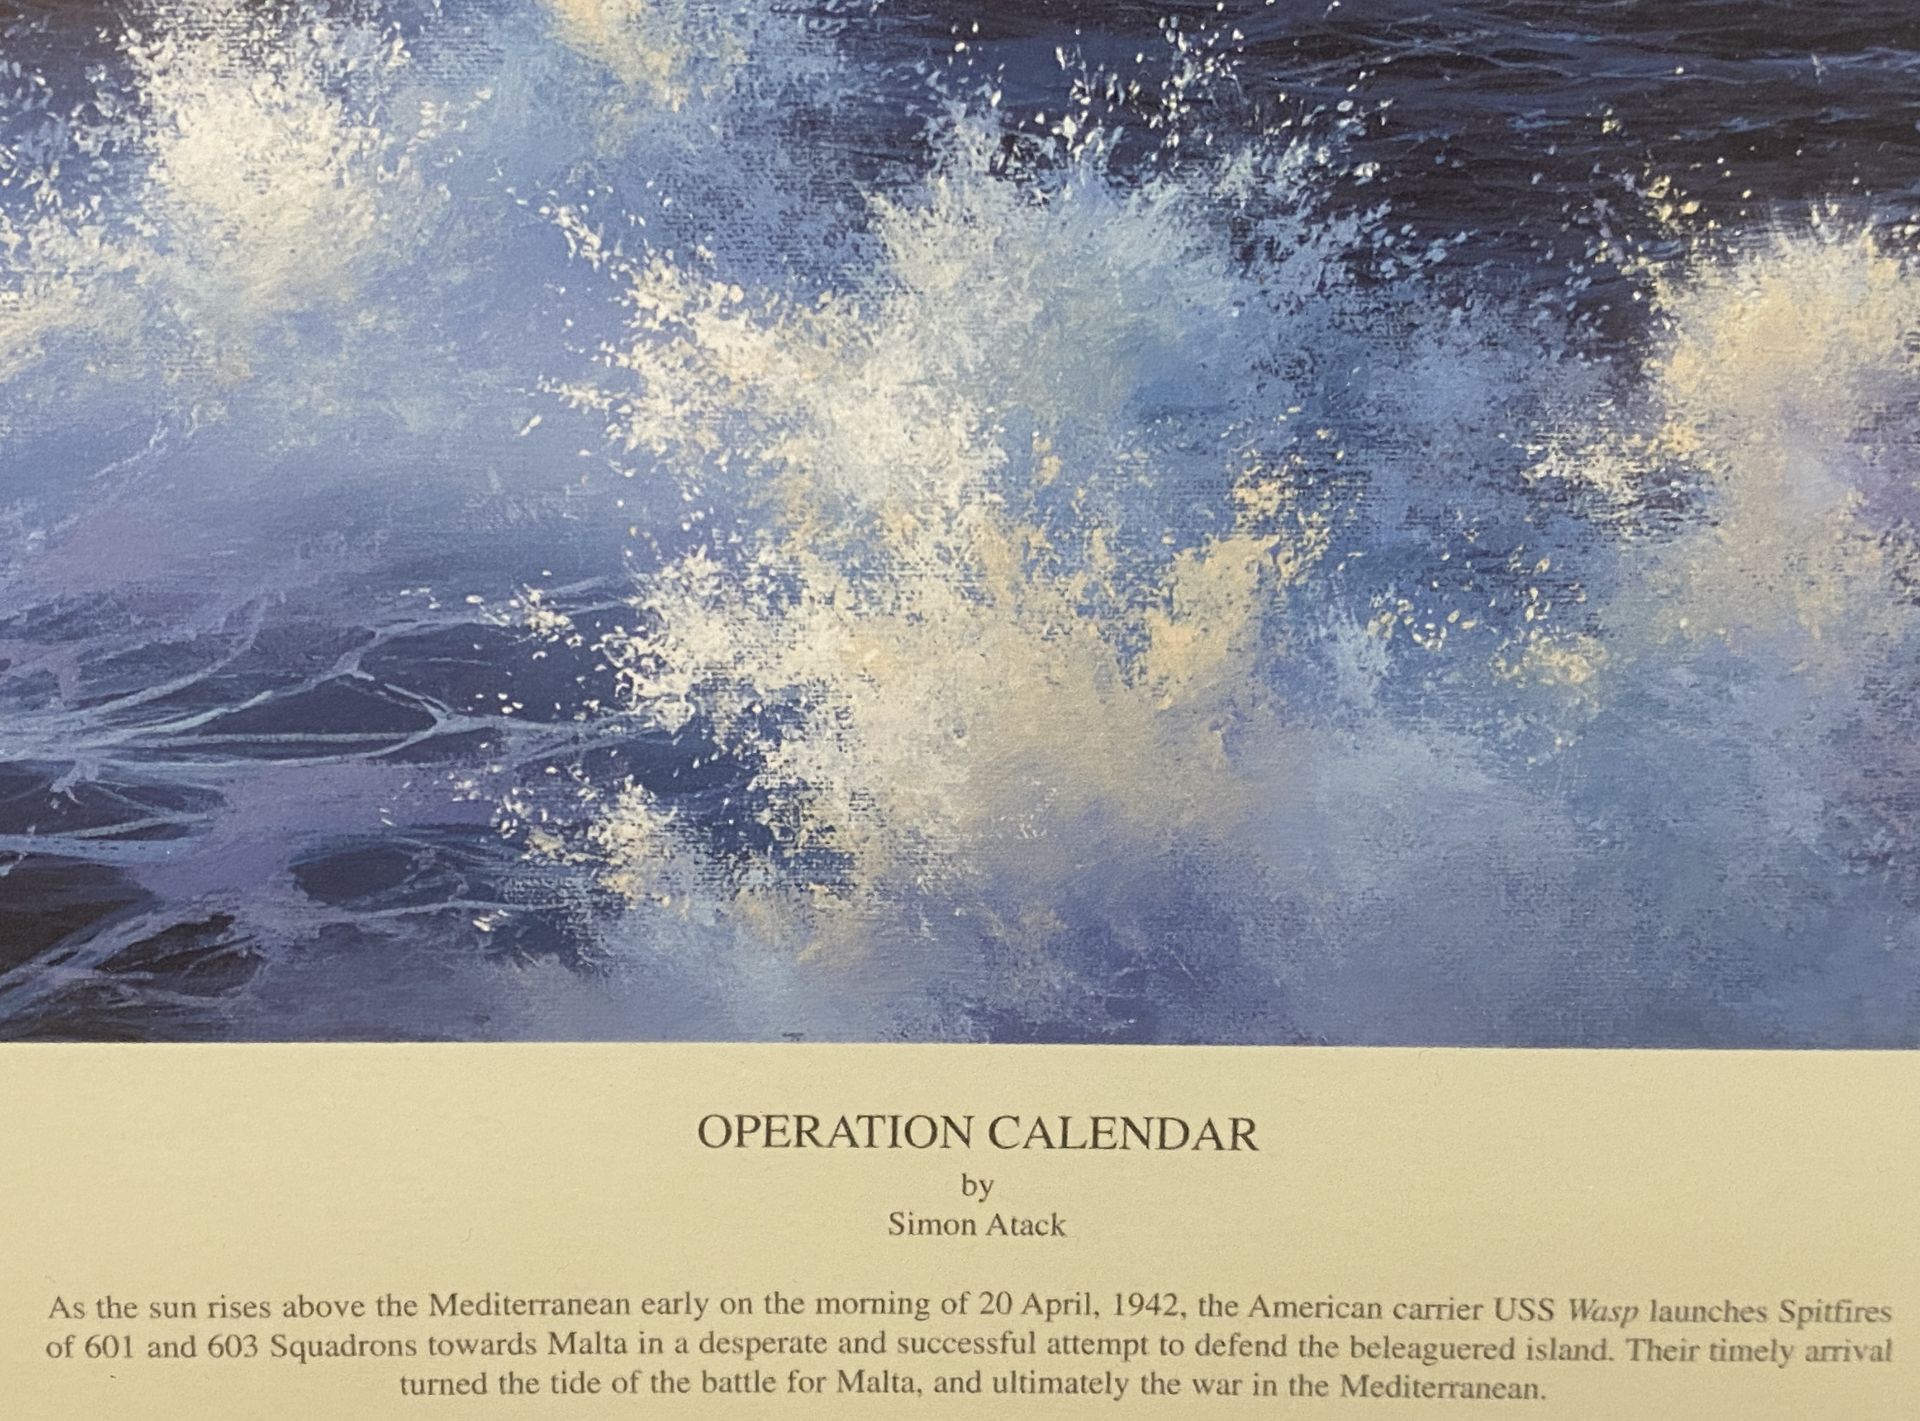 Simon Atack 'Operation Calendar' a framed artists proof no 2/25 featuring spitfires taking off from - Bild 3 aus 8